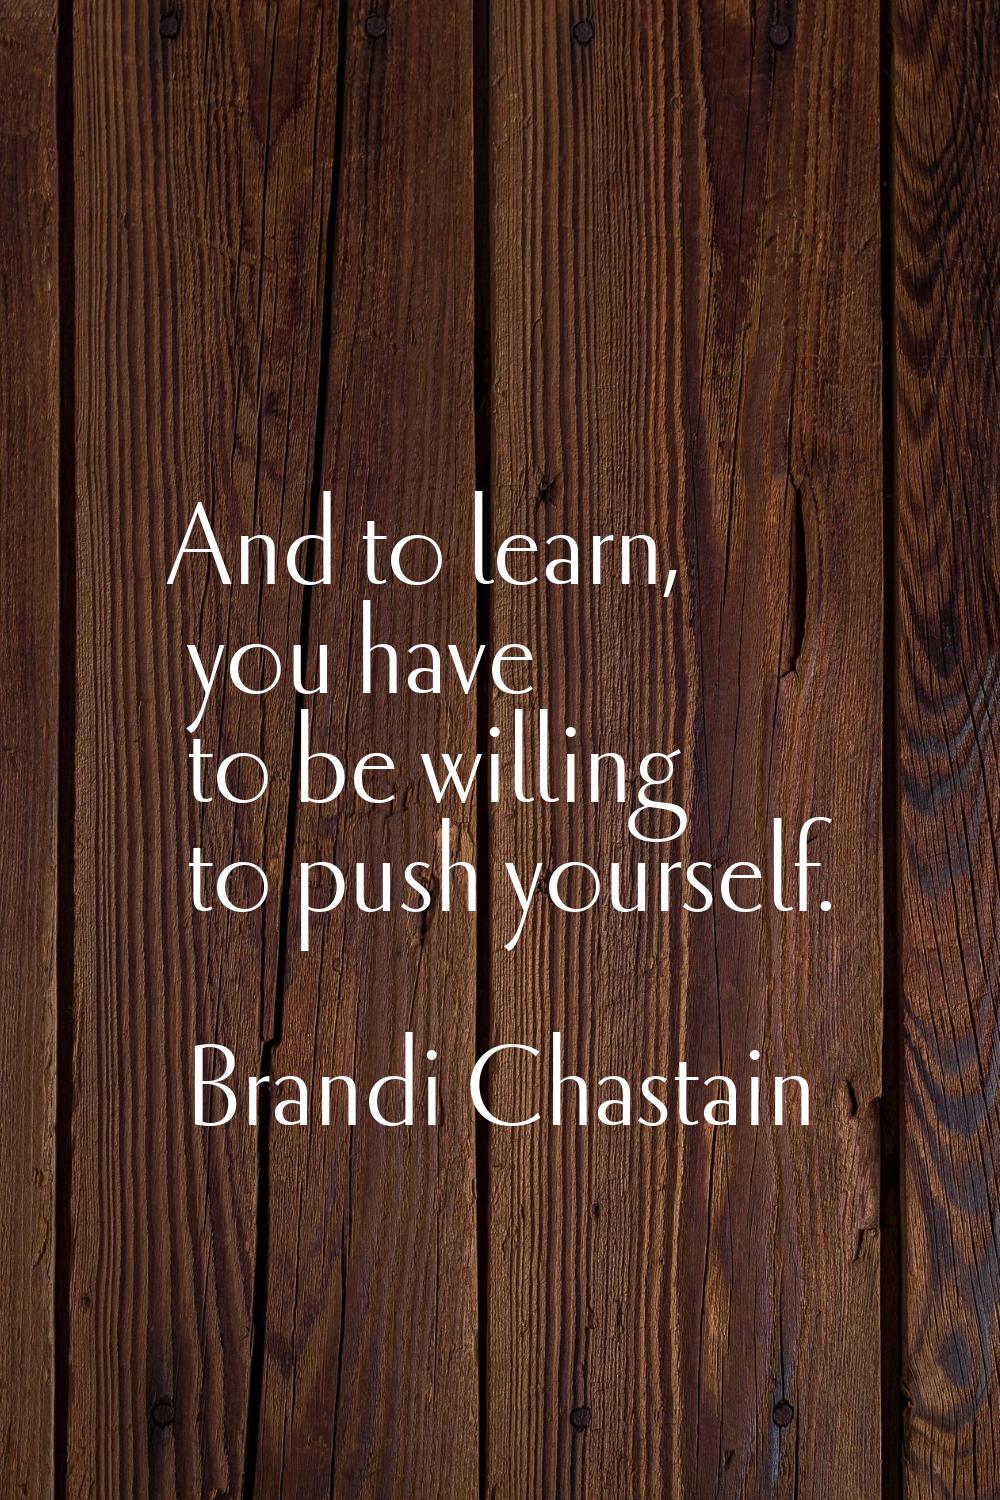 And to learn, you have to be willing to push yourself.